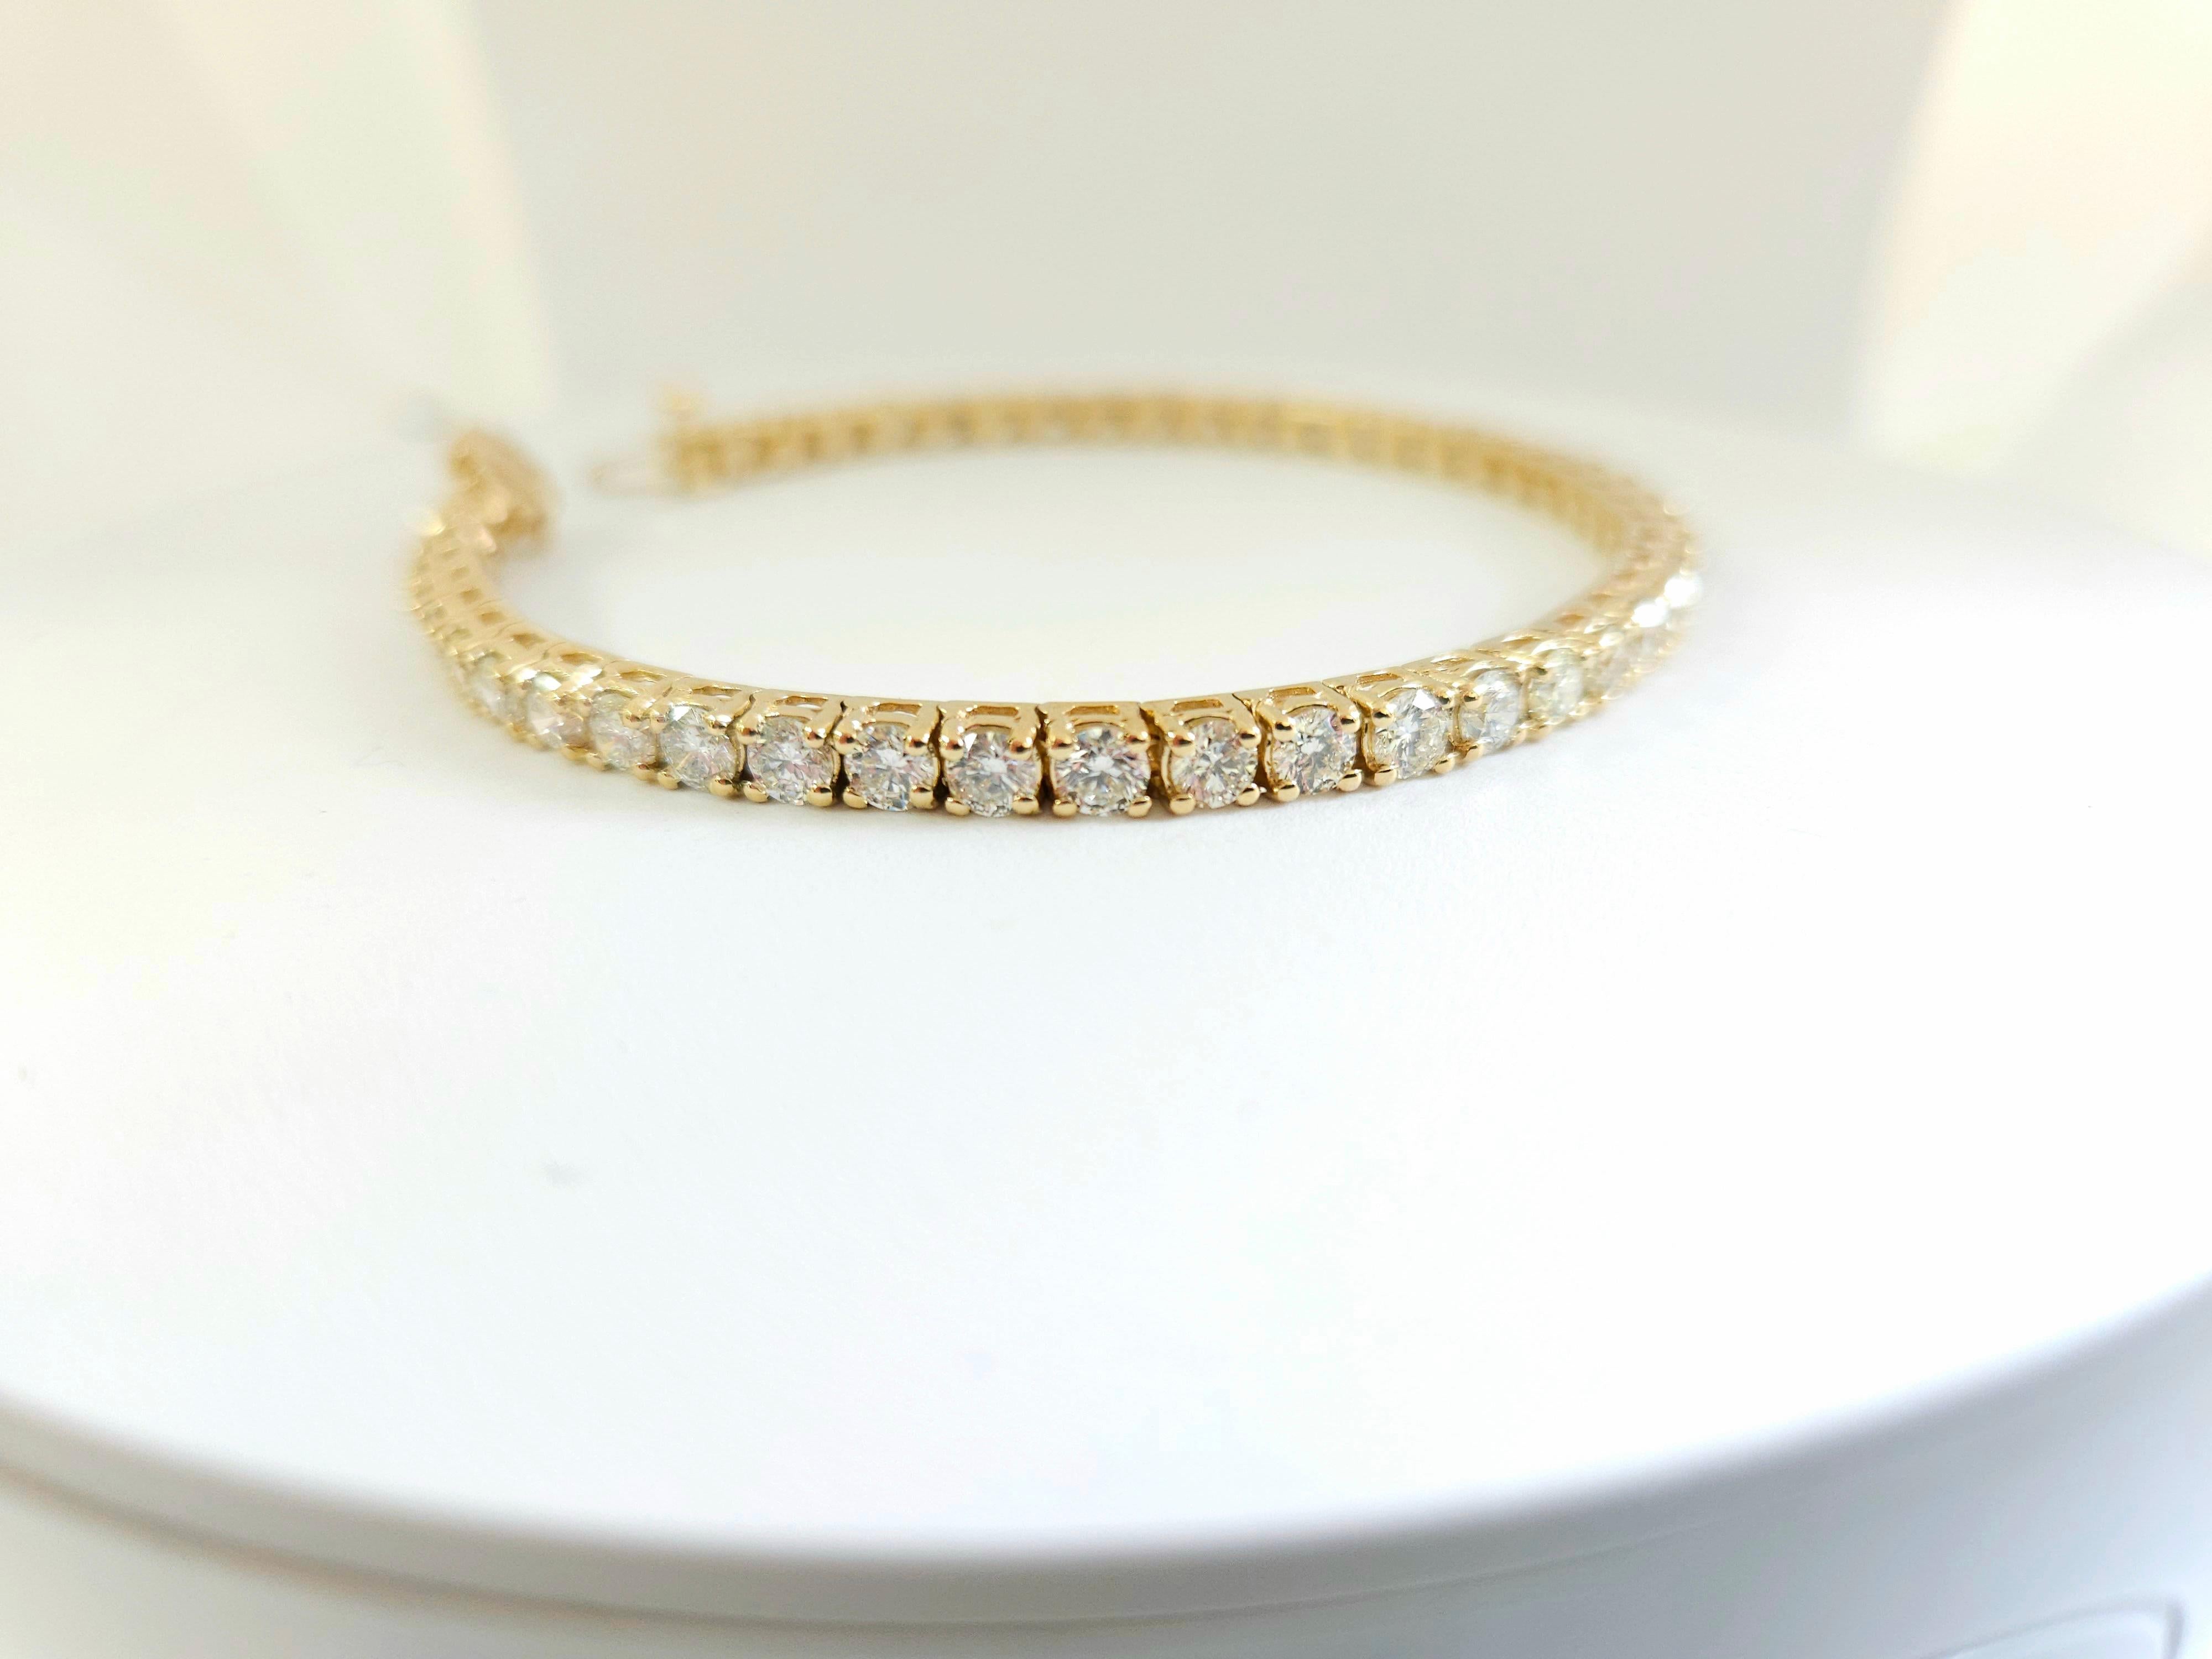 Natural diamonds tennis bracelet round-brilliant cut  14k yellow gold. 
7 inch. Average Color H, Clarity VVS,VS, 3.60 mm wide,30 pcs, 13.24 grams very shiny don't miss.

*Free shipping within U.S*

